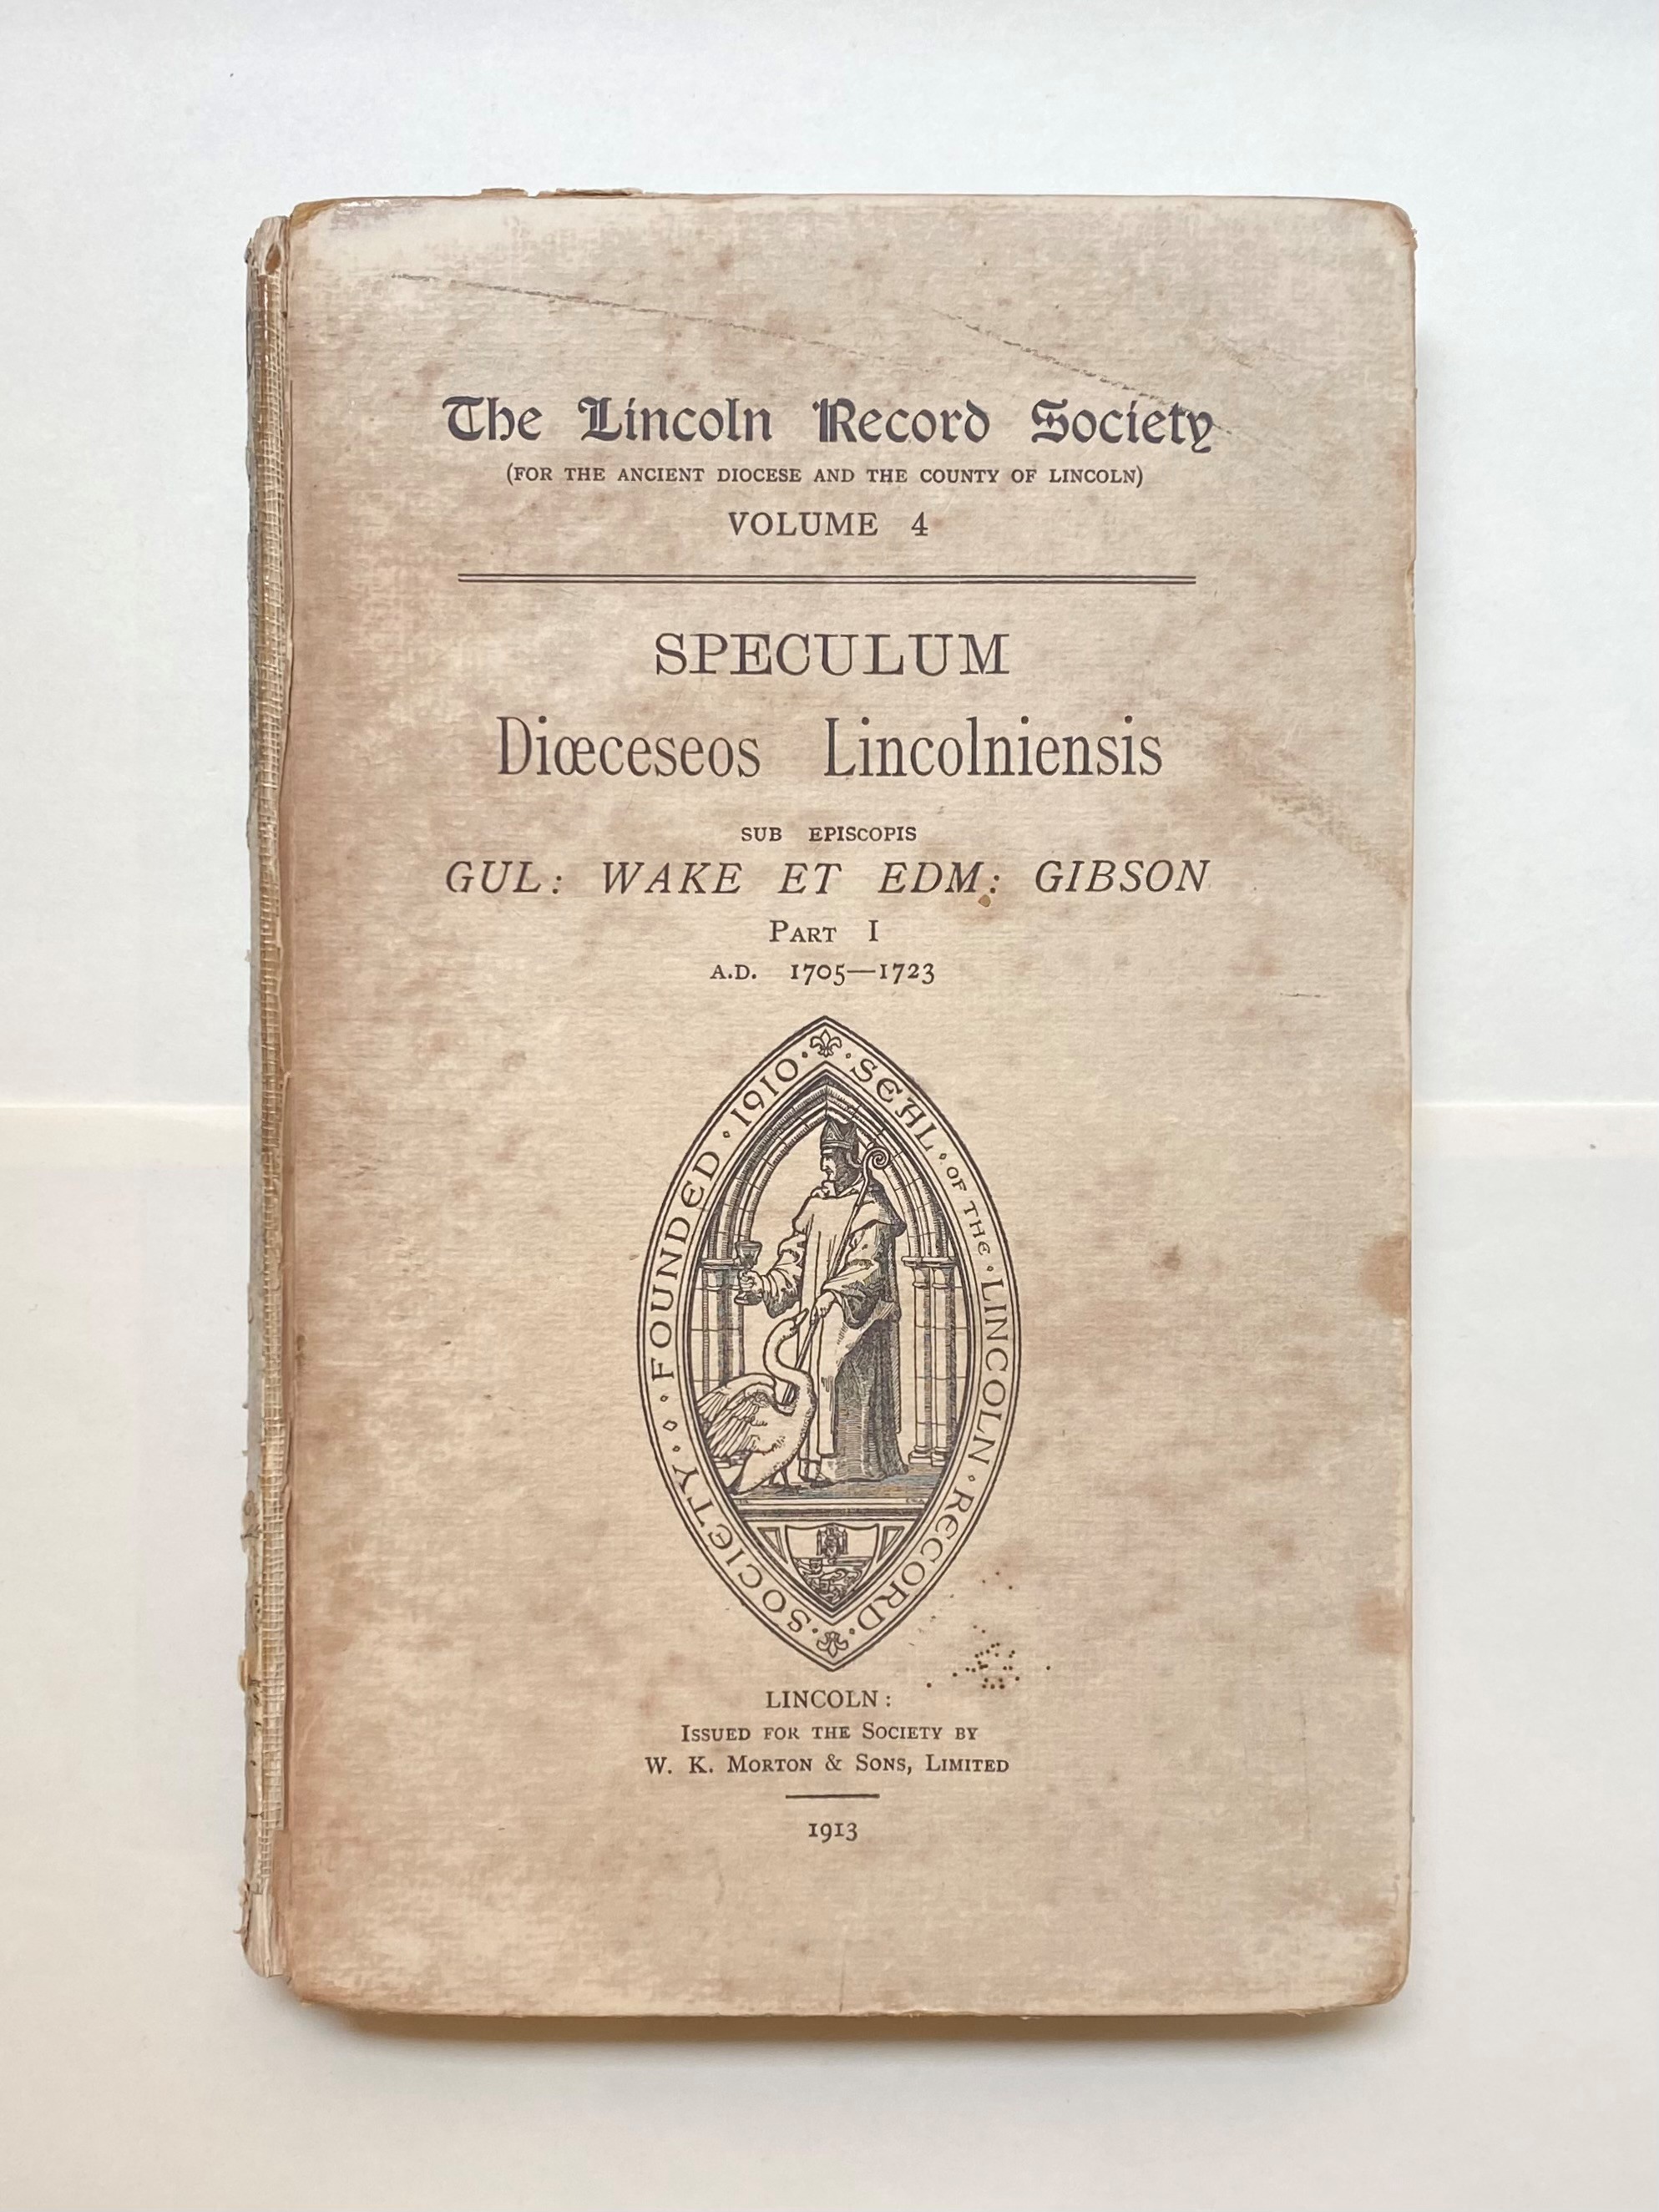 The Lincoln Record Society Volume 4: Speculum, Dioceseos Lincolniensis, Sub Episcopis, Gul: Wake Et Edm: Gibson, Part I A.D. 1705-1723 